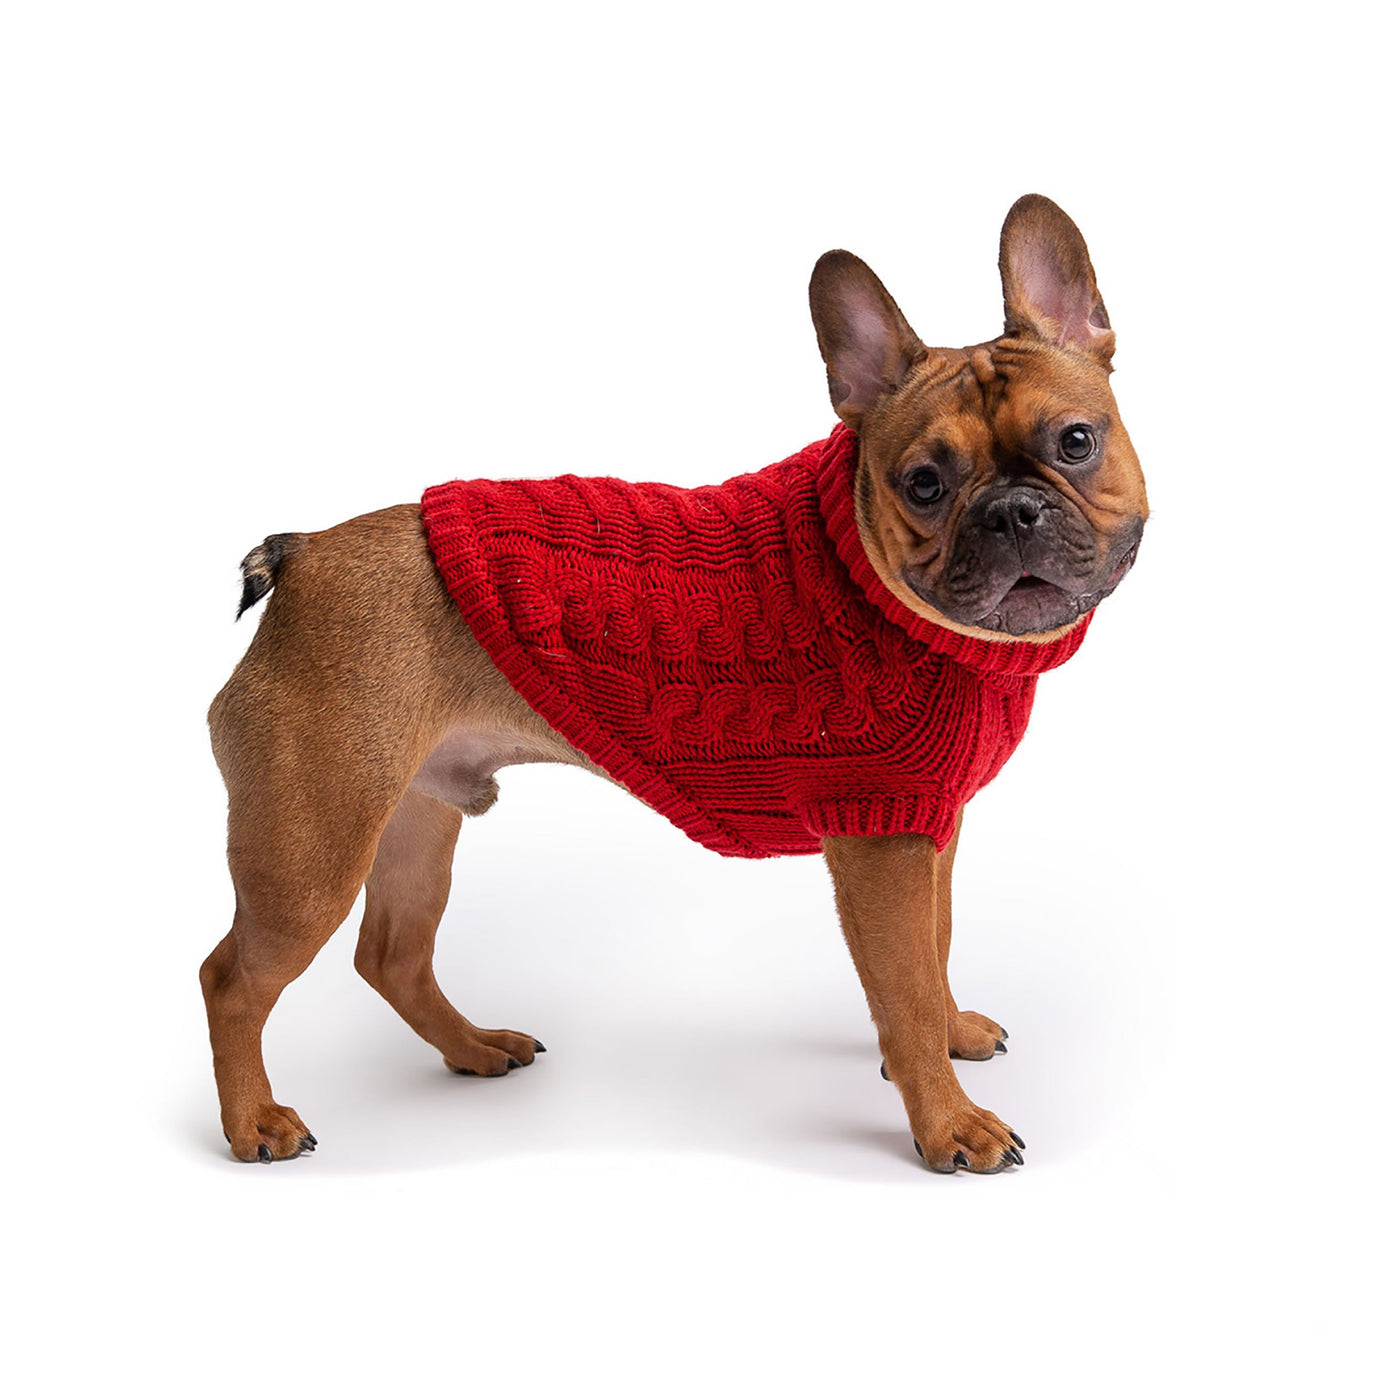 Chalet Sweater - Red